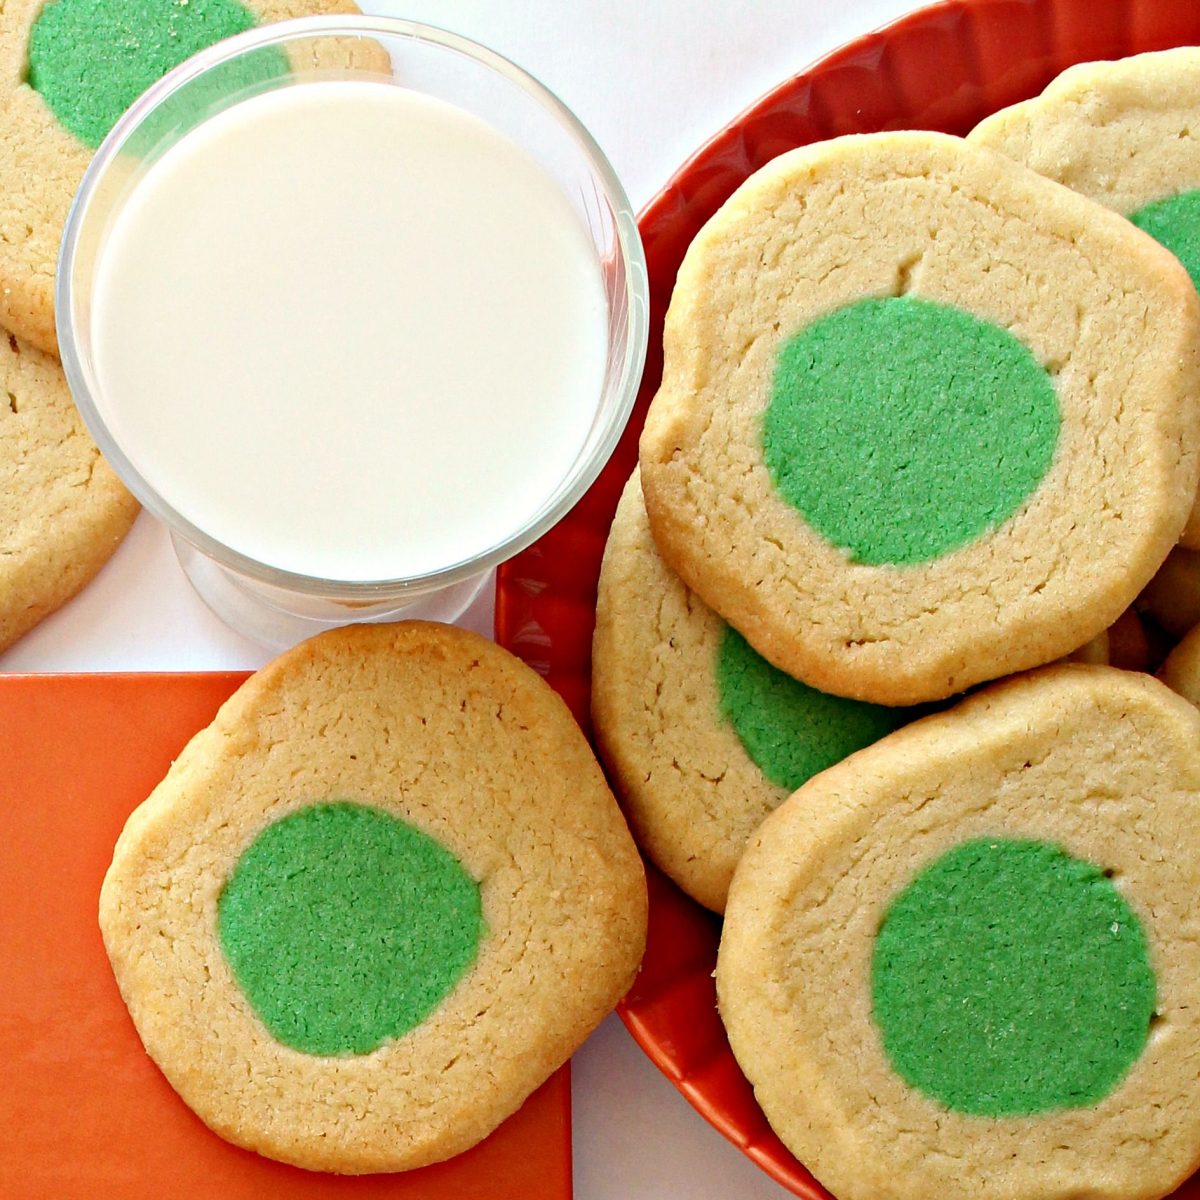 Green Eggs and Ham Cookies and glass of milk.